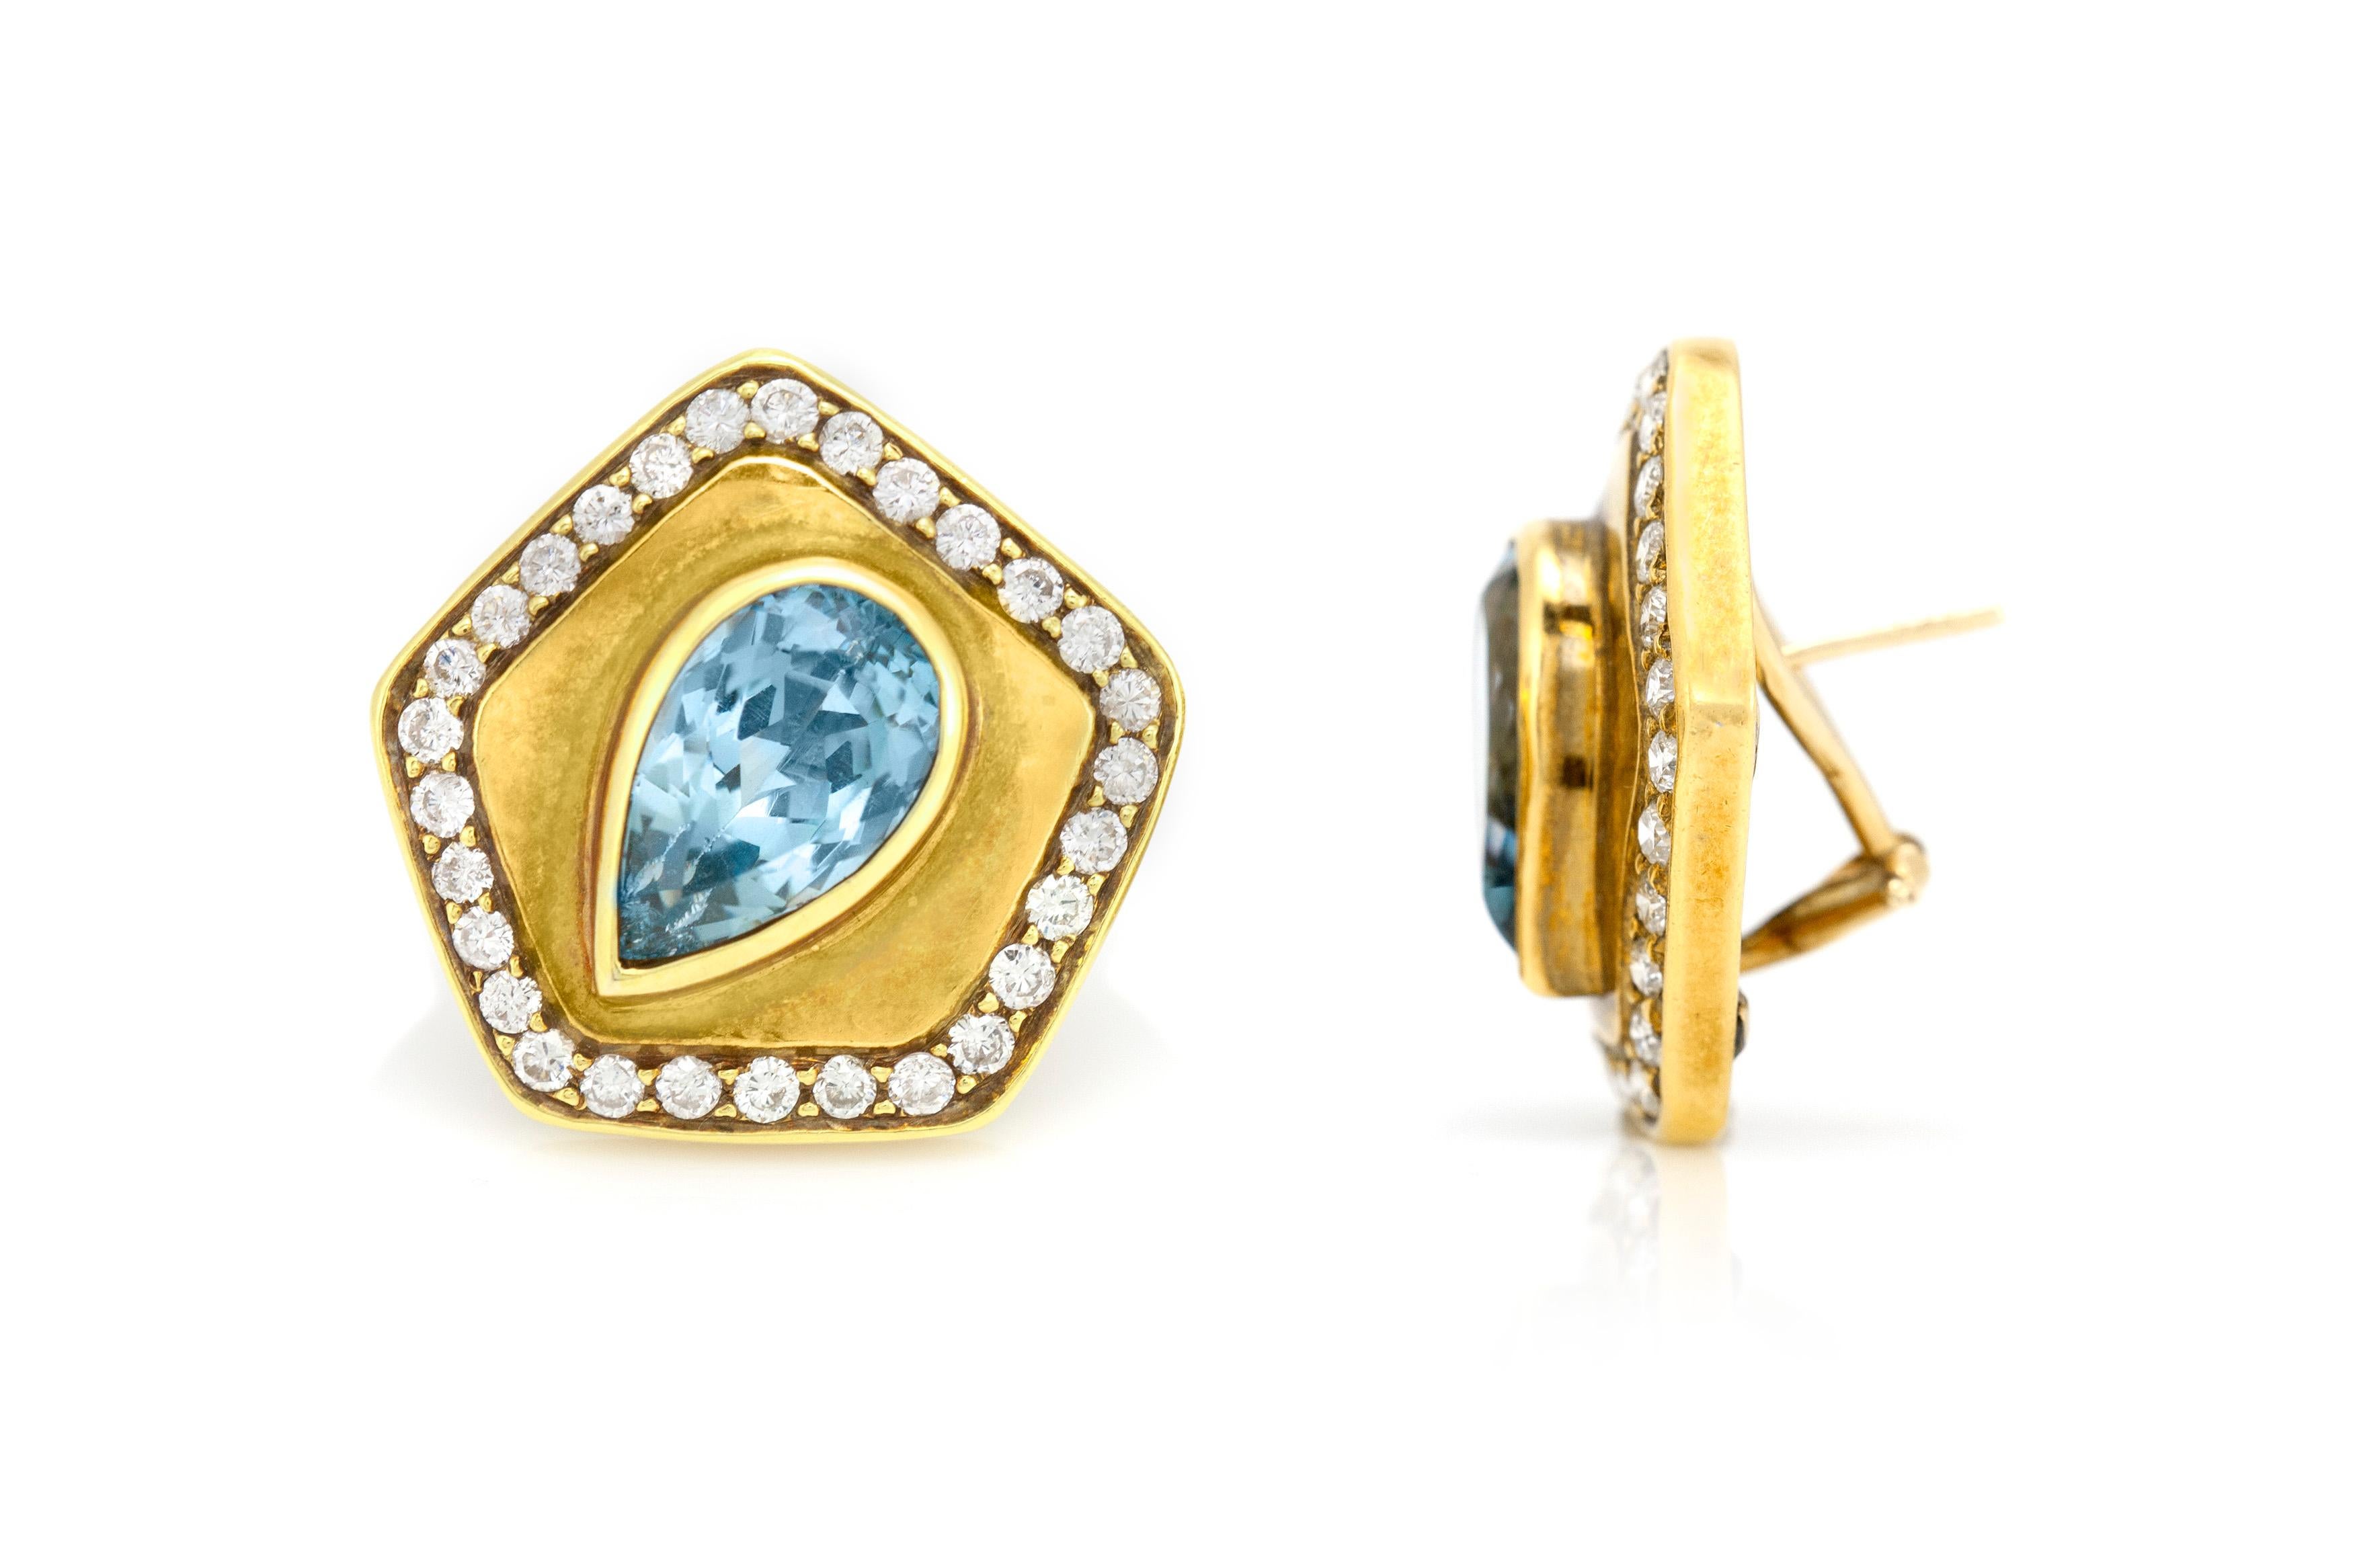 The earrings is finely crafted in 18k yellow gold with diamonds weighing approximately total of 2.30 carat and topaz weighing approximately total of 20.00 carat.